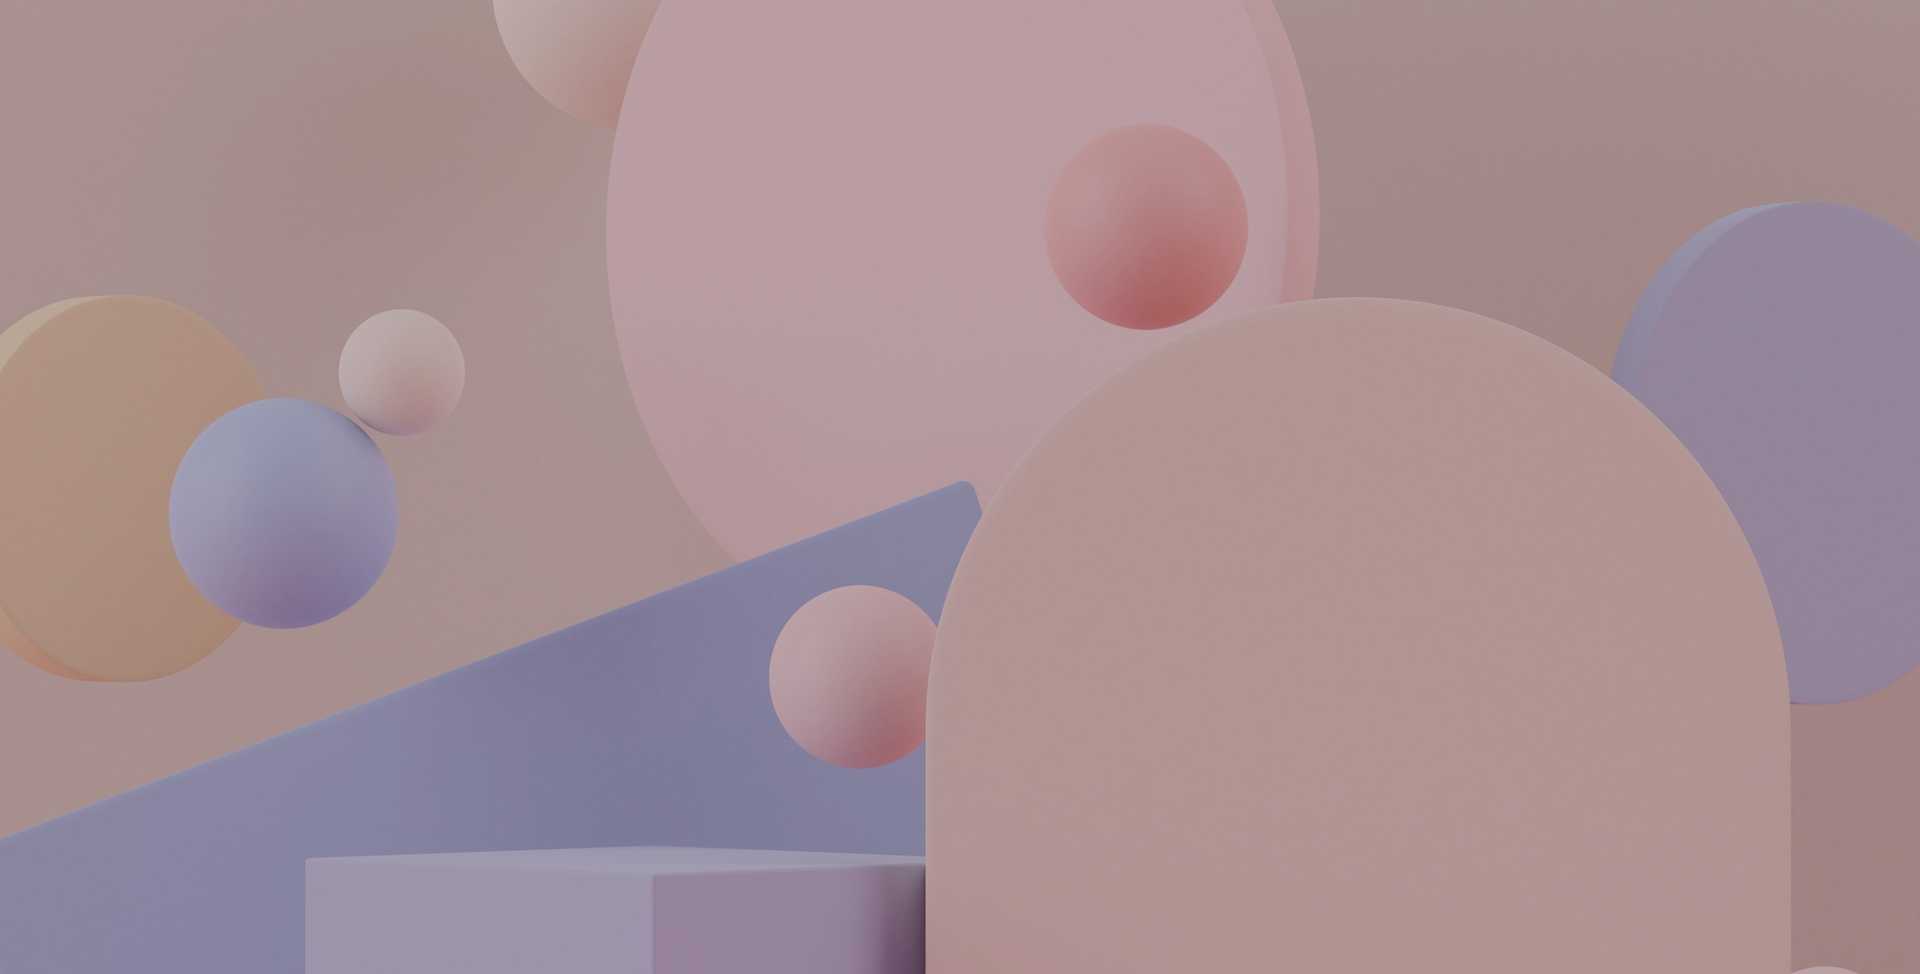 3D rendered image of various pastel pink and purple colored shapes against a beige background